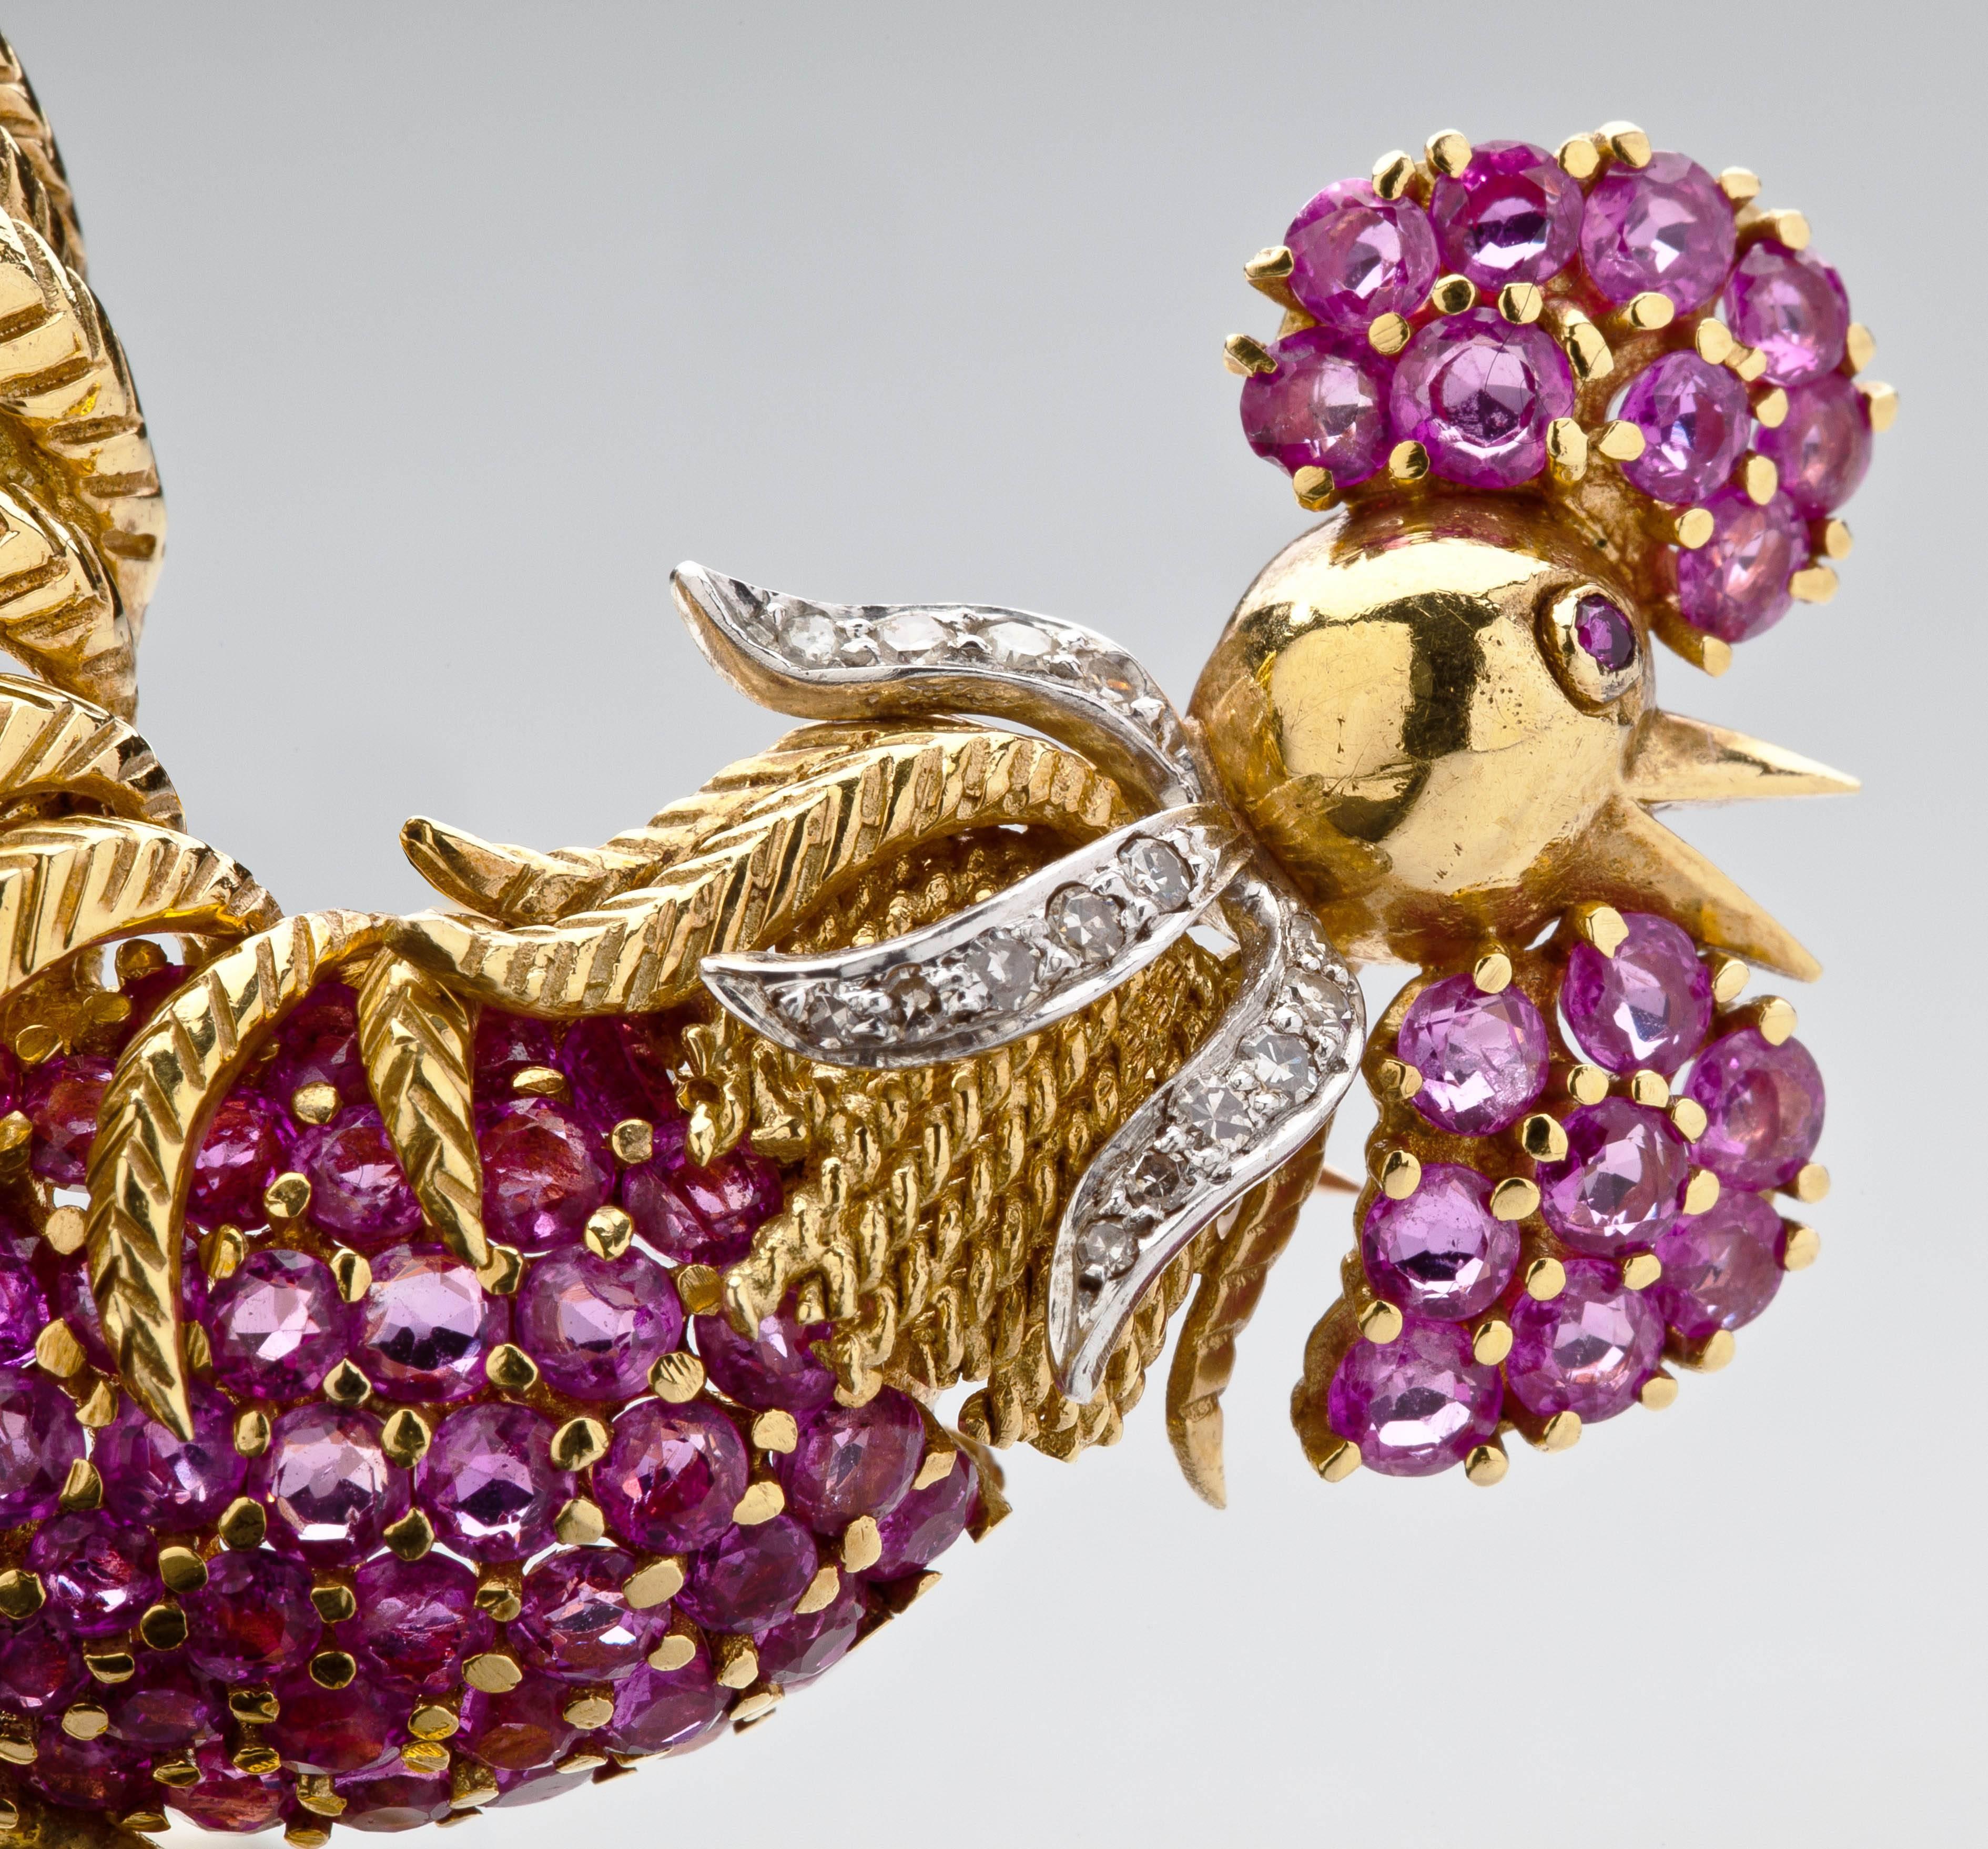 This strutting 18 karat gold rooster from Tiffany has a stomach and cockscomb of rubies, a feathered neck of diamonds and a textured gold tail.  He is the cock of the walk. The rubies total 3.5 carats and are beautifully matched in rich red color. 